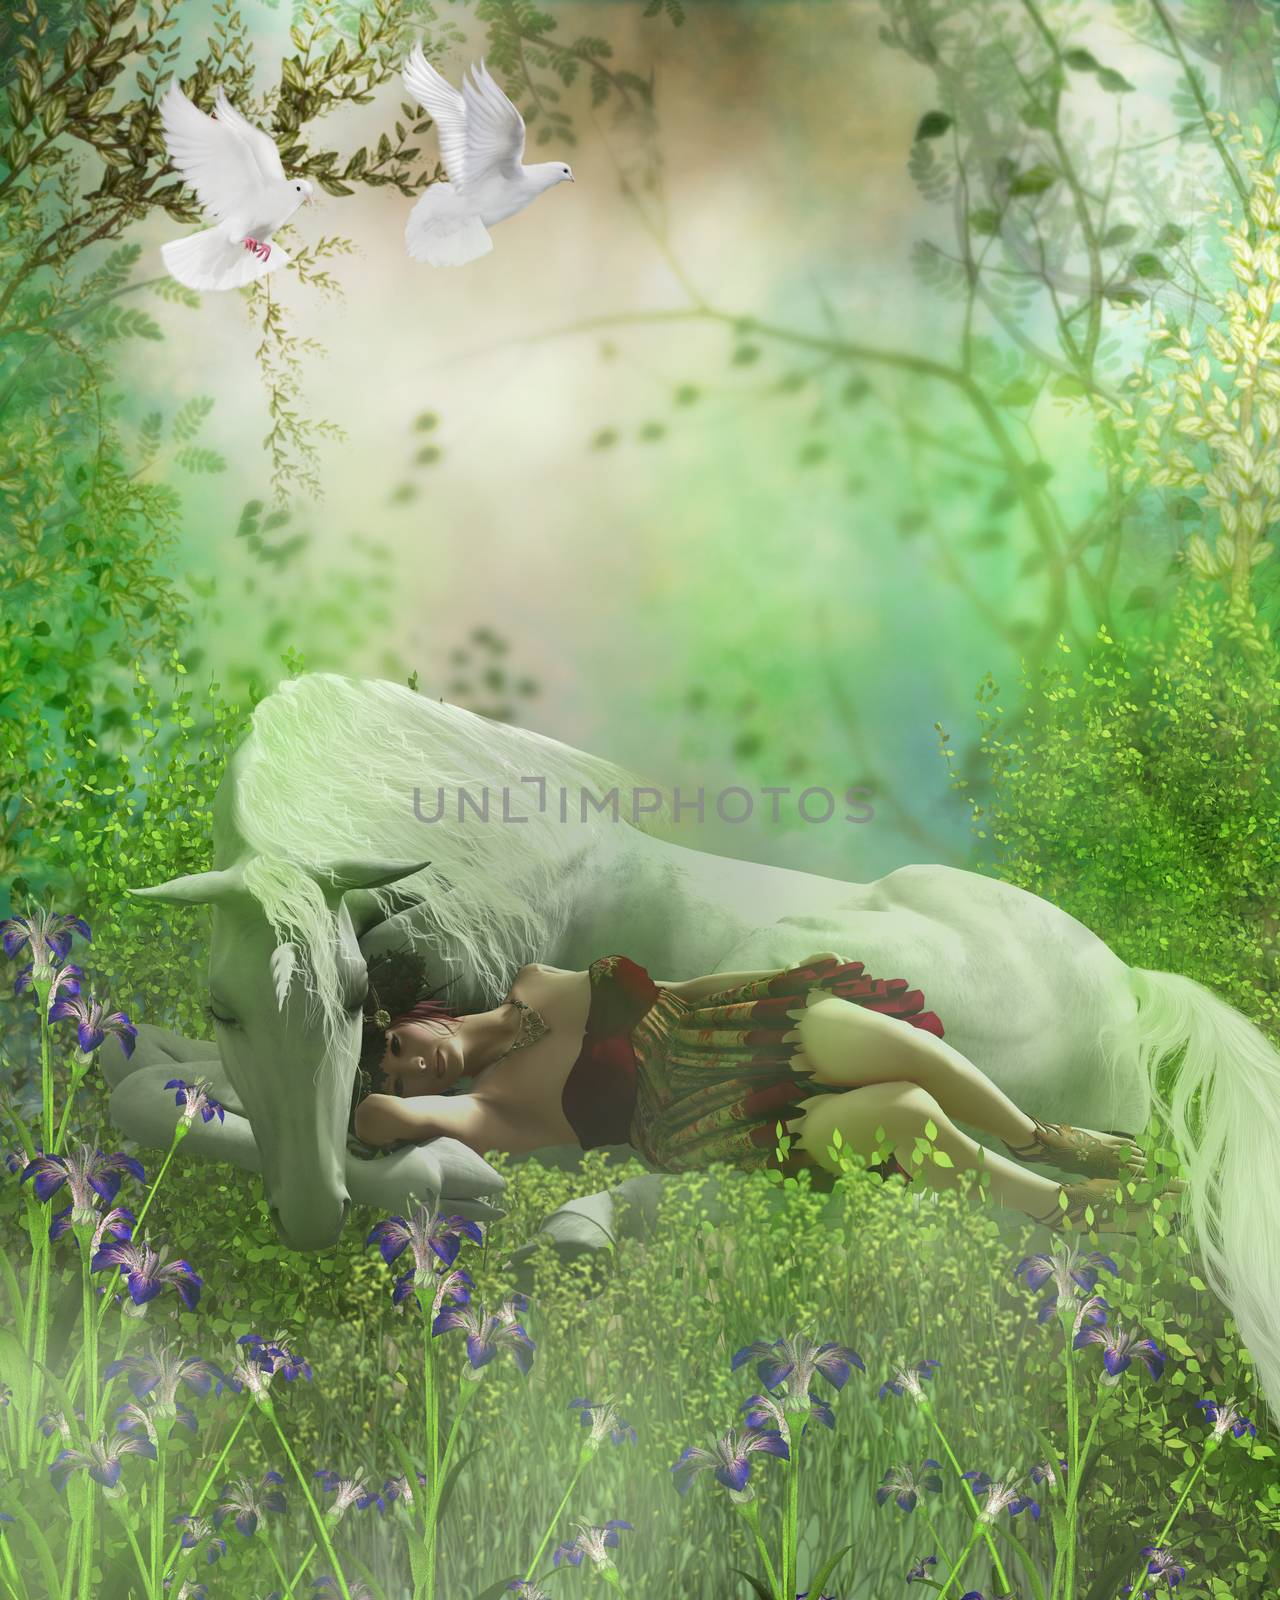 A forest fairy finds a white unicorn a nice resting place for an afternoon nap as white doves fly over.